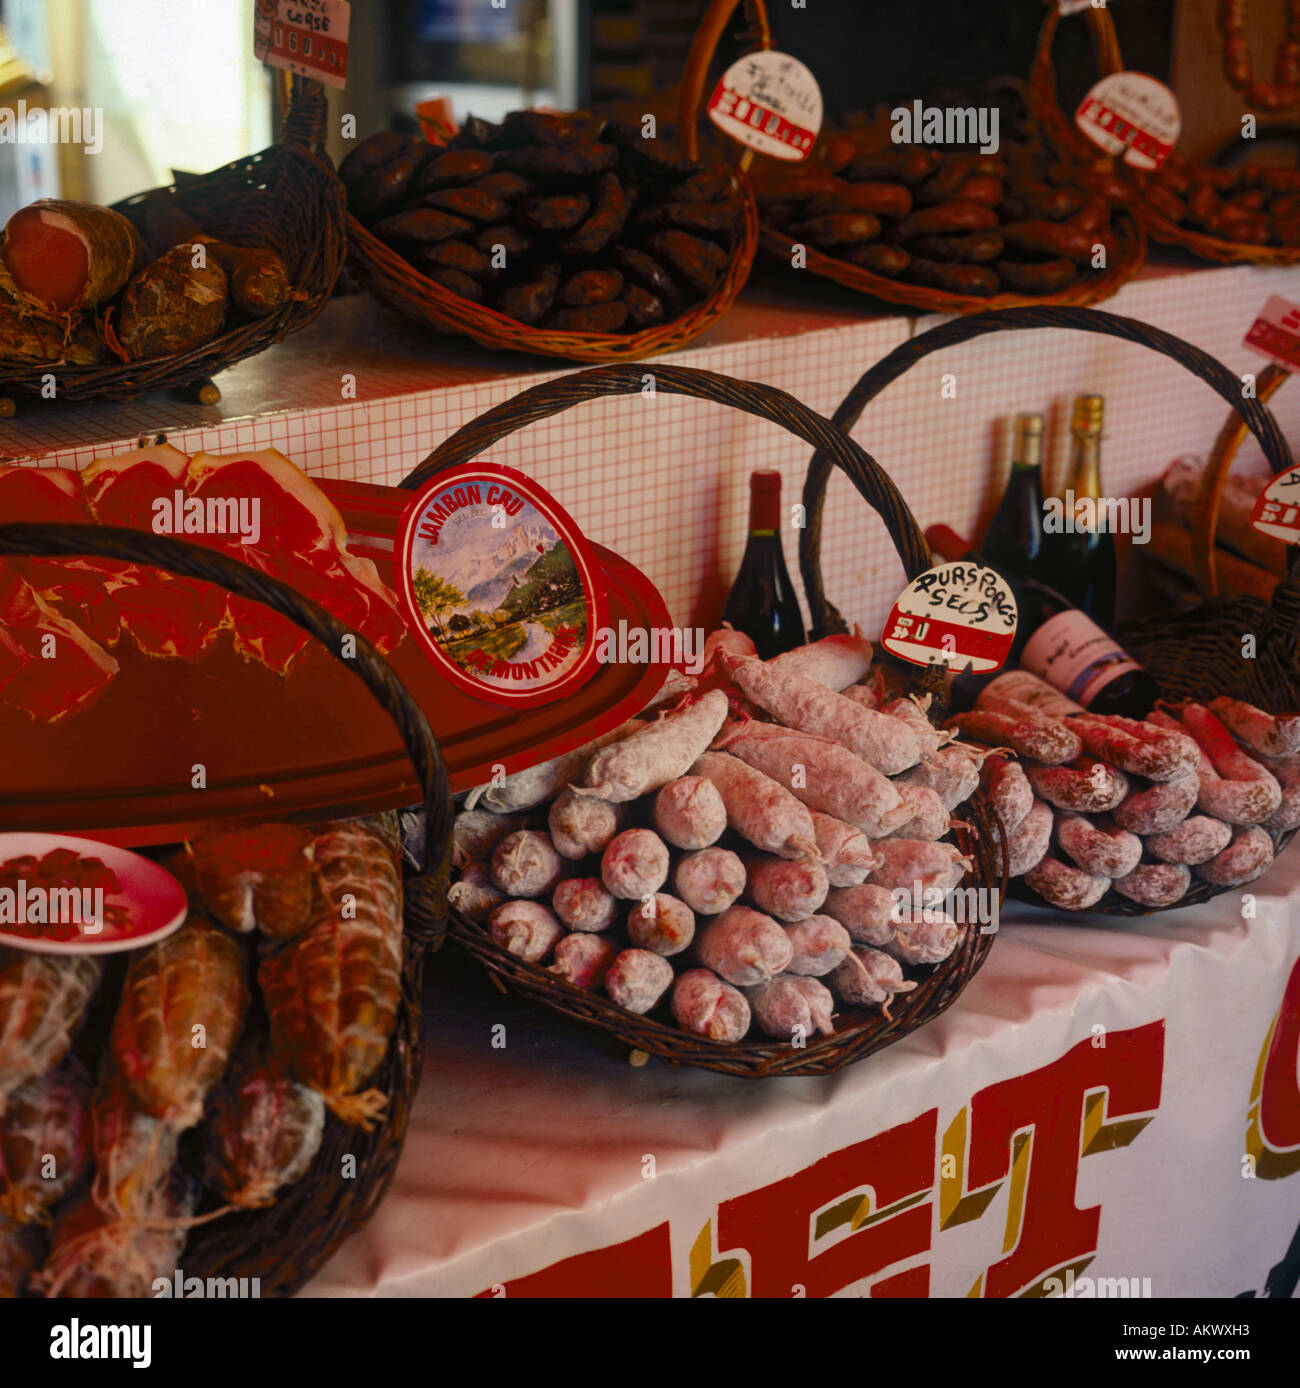 Colourful display of spicy meats and sausages in wicker baskets with bottles of wine on market stall in the South of France Stock Photo